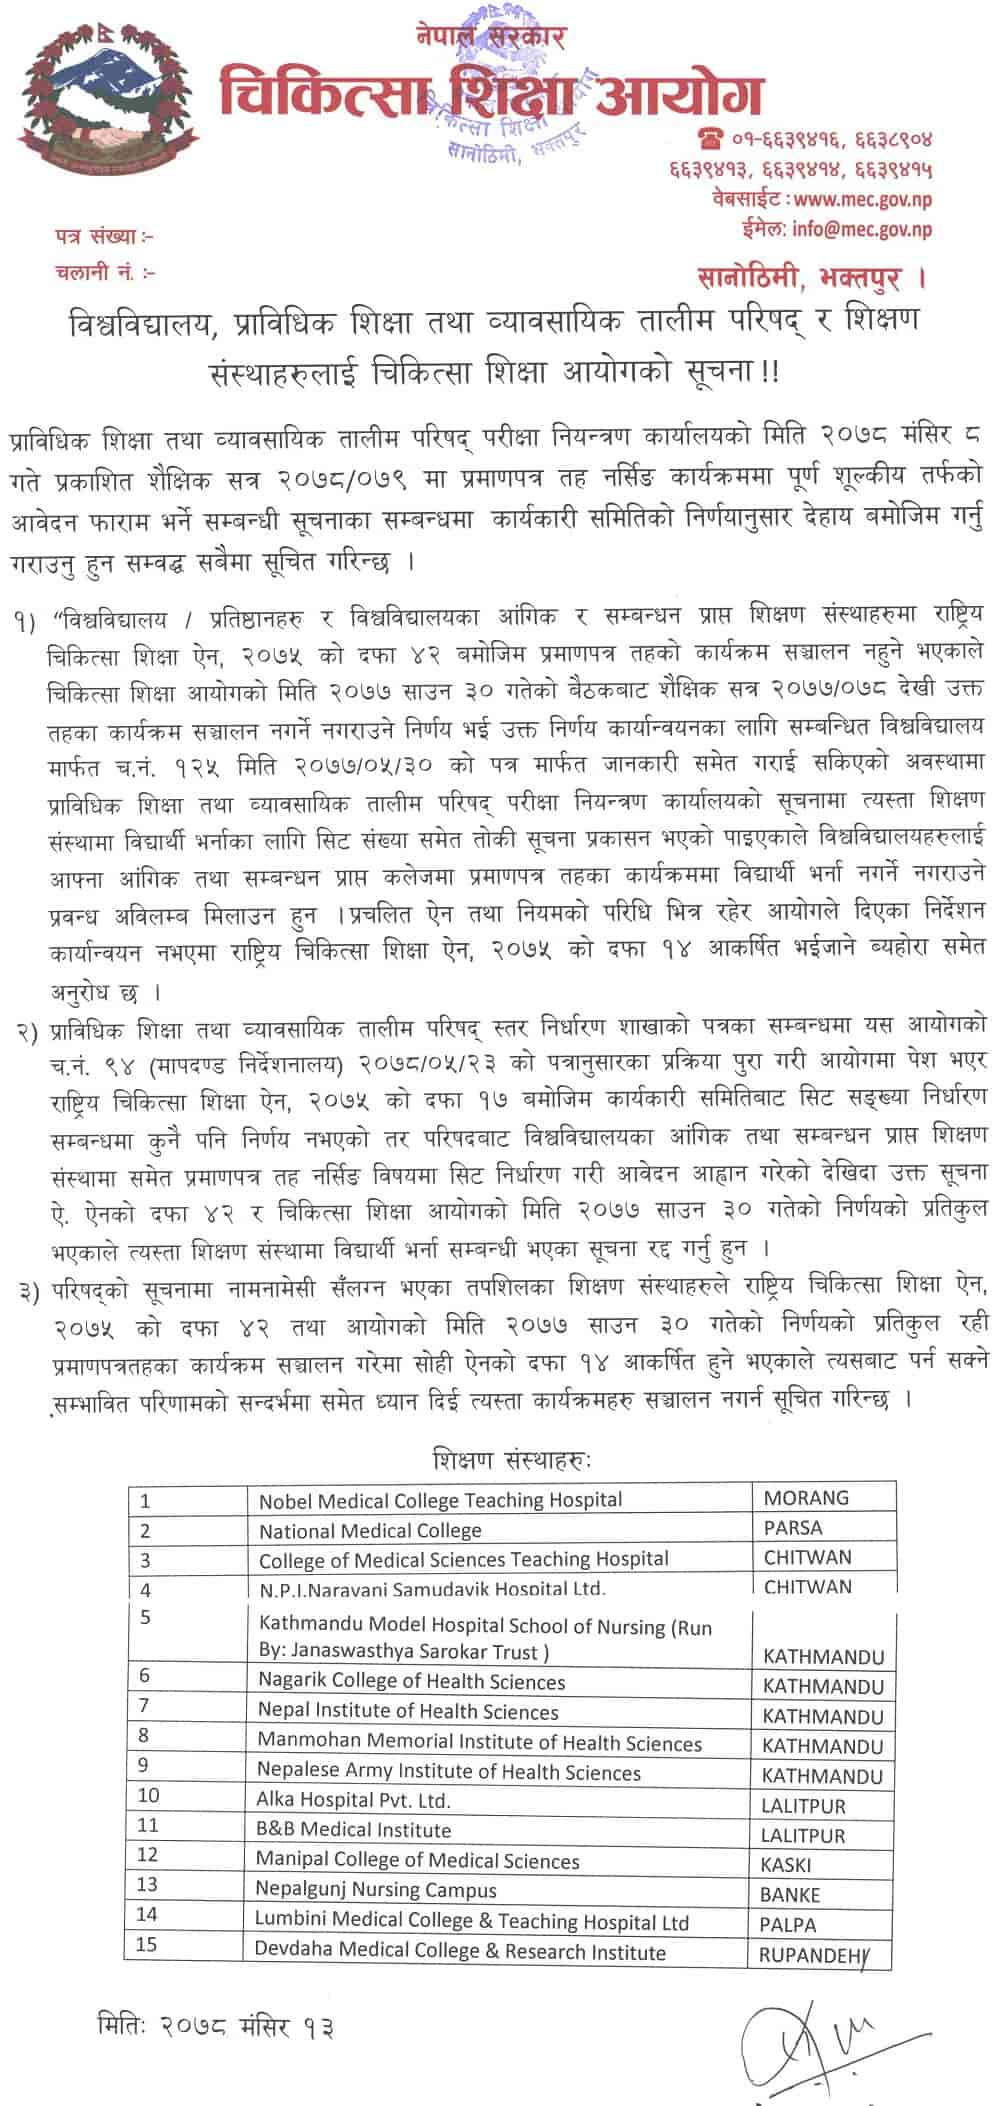 Nepal medical Commission Restricted Admission of PCL Nursing in 15 Educational Institutions